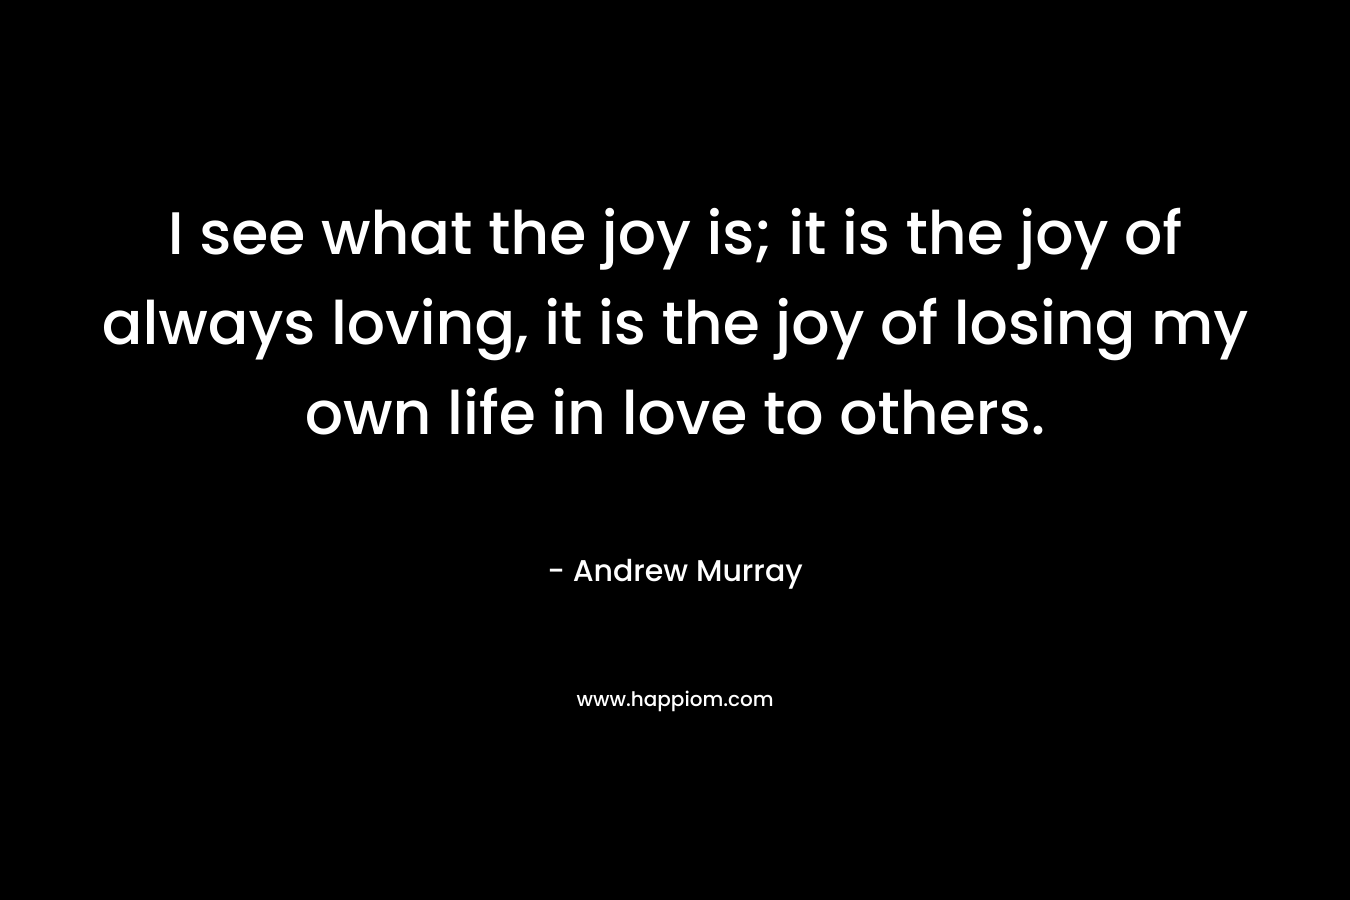 I see what the joy is; it is the joy of always loving, it is the joy of losing my own life in love to others.